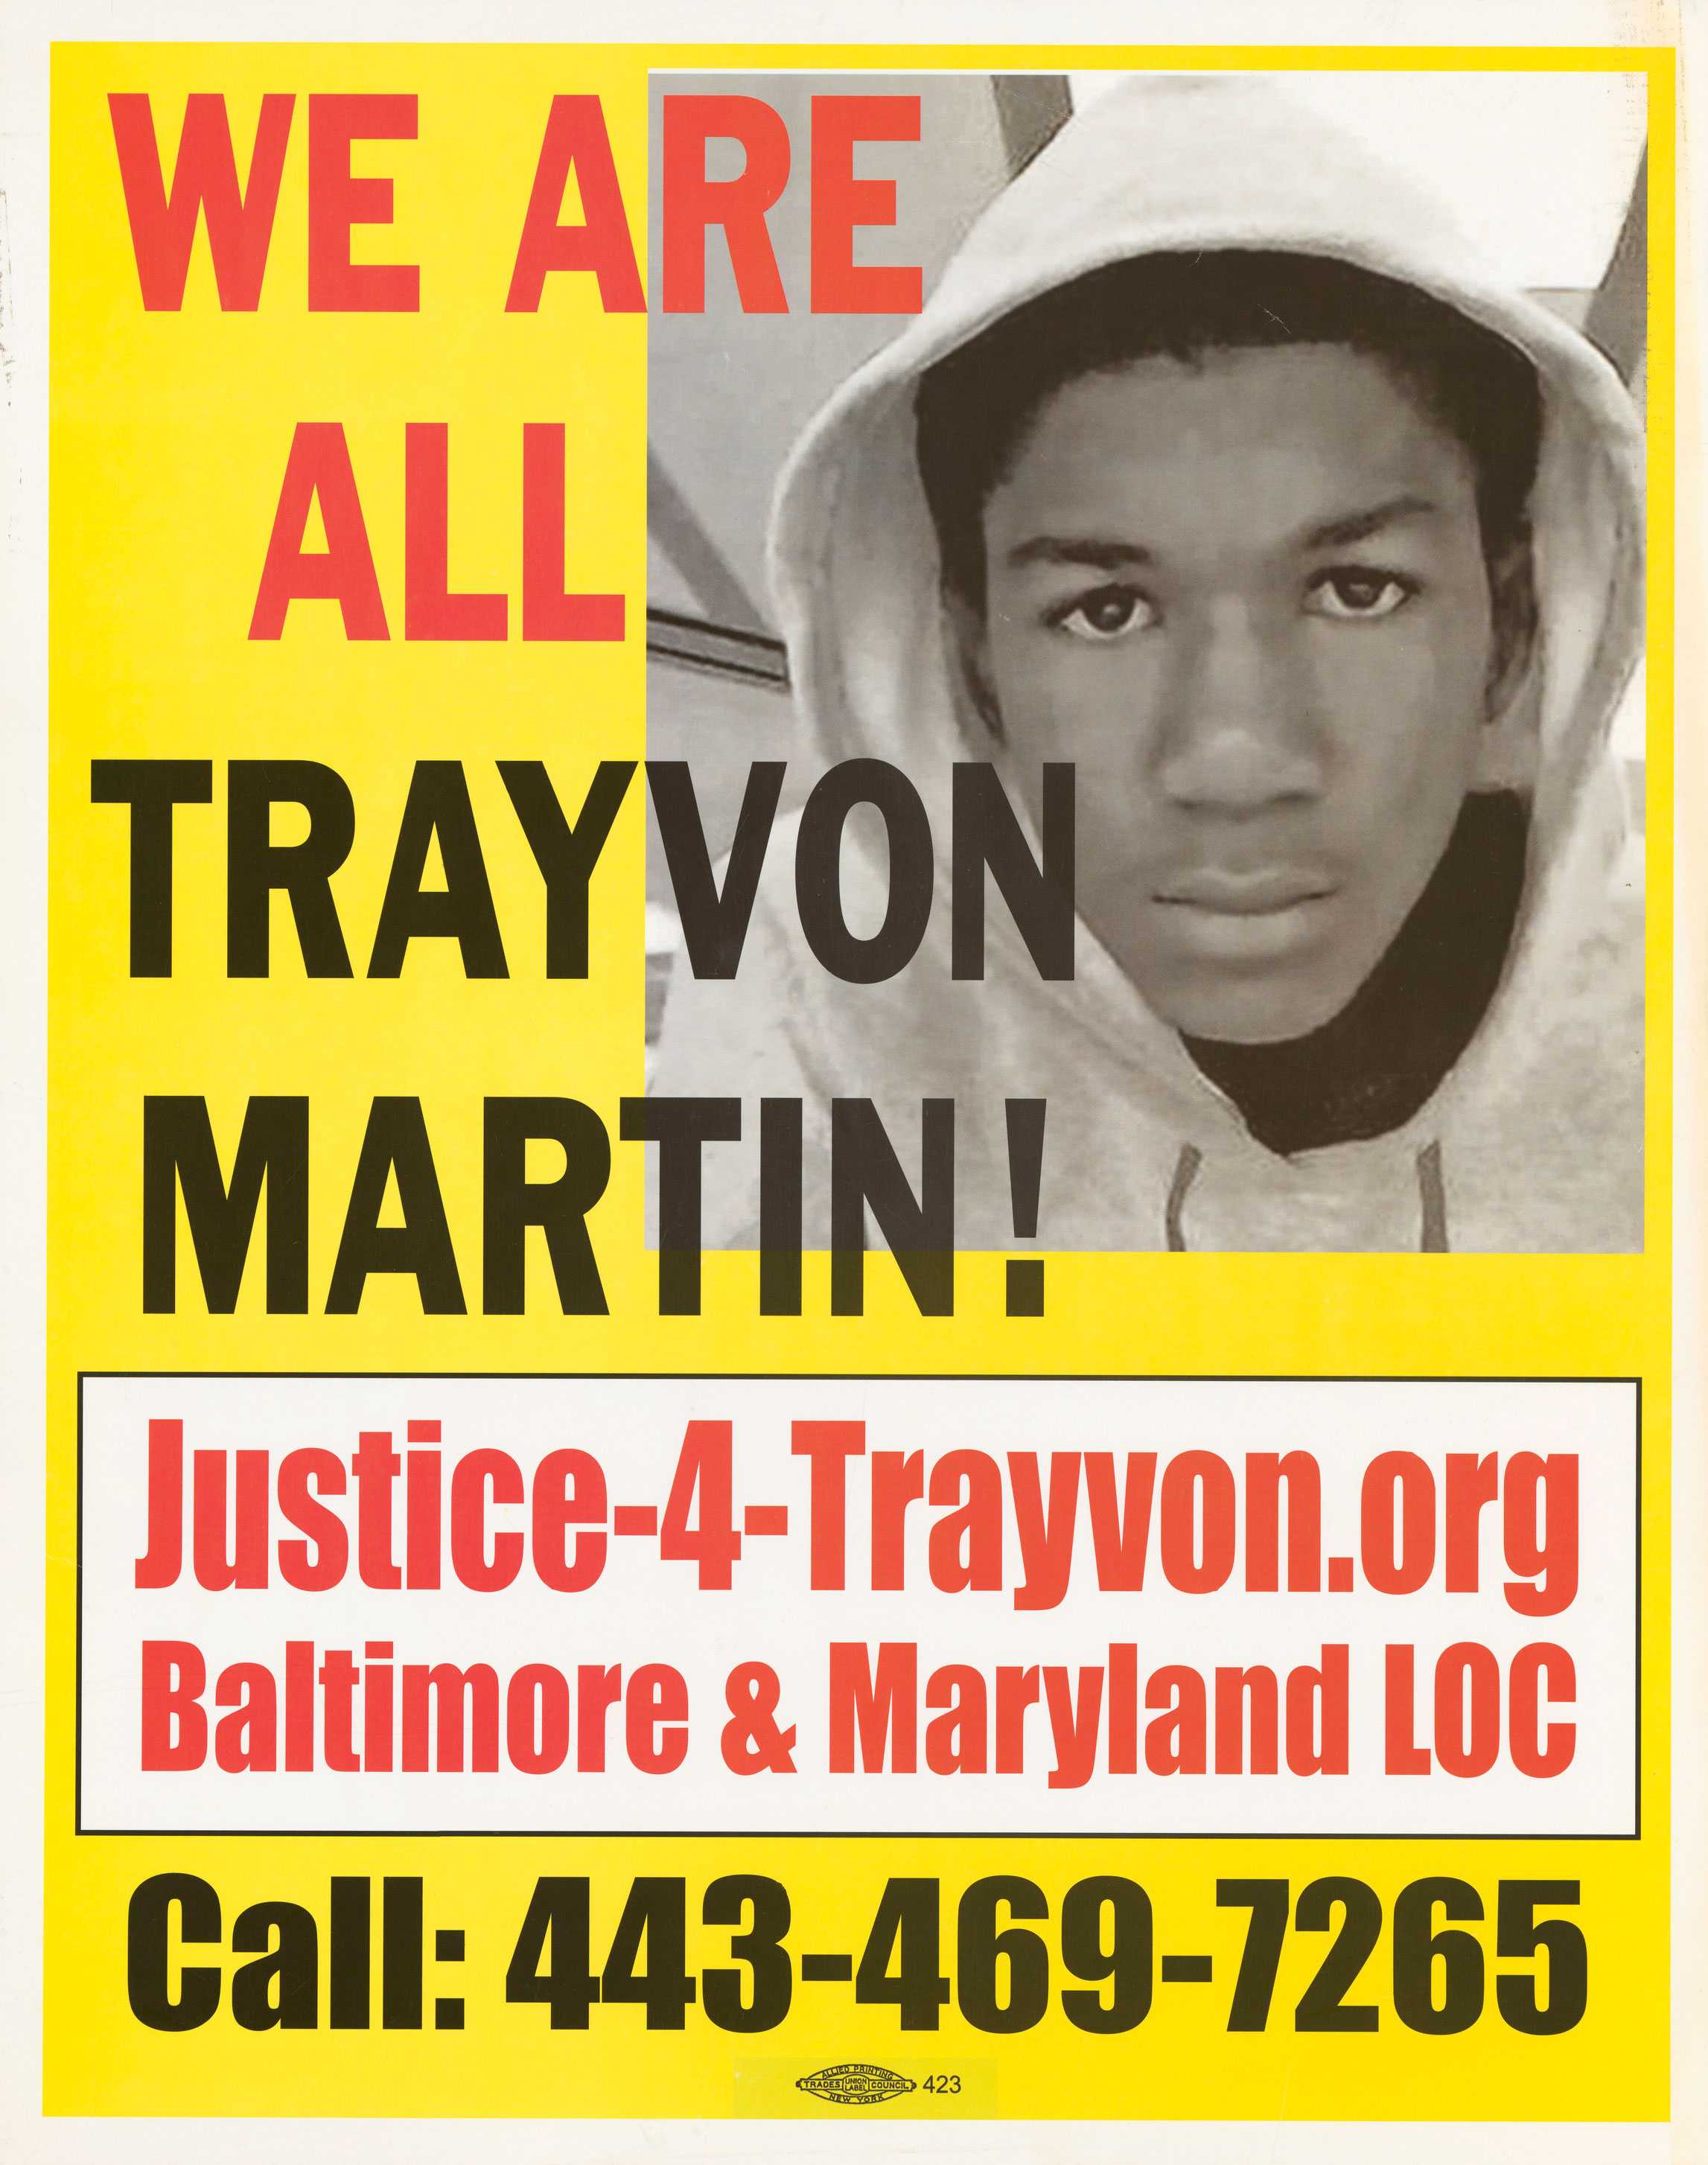 A yellow and red poster calling for justice for Travon Martin. It has a picture of Trayvon and a phone number at the bottom.